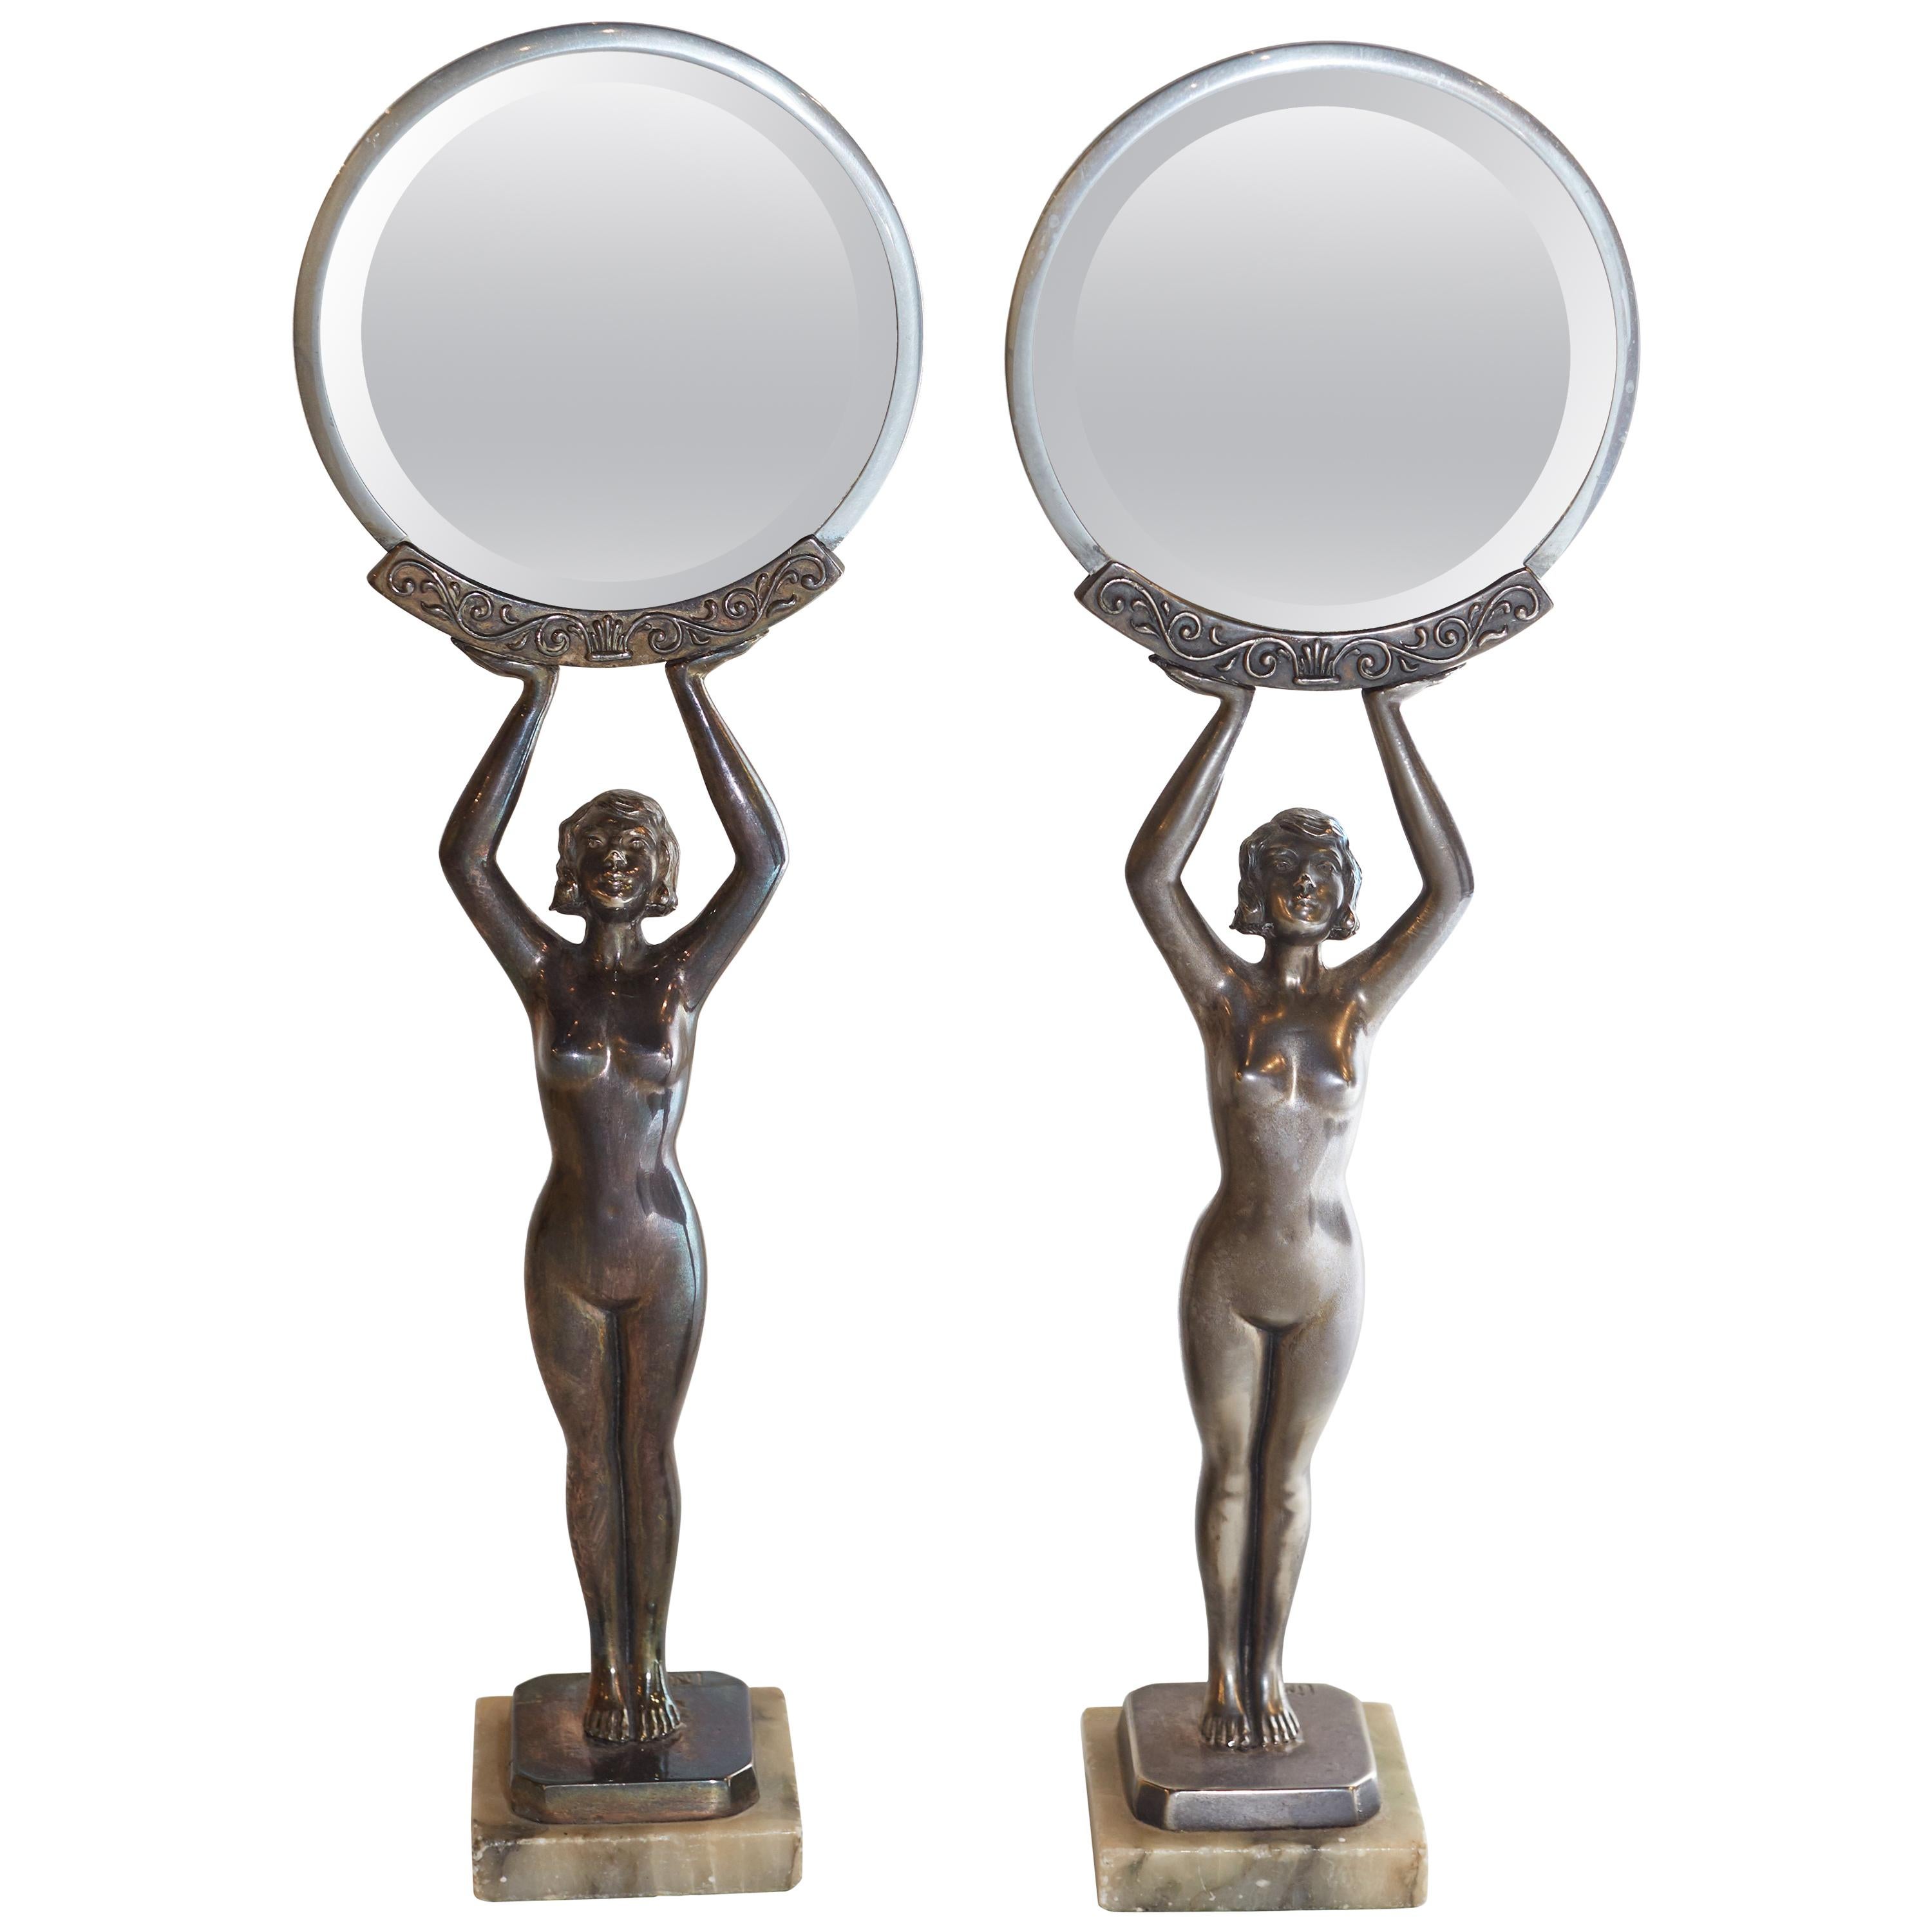 Pair of Art Deco Figural Silvered Metal Boudoir Table Mirrors by Limousin